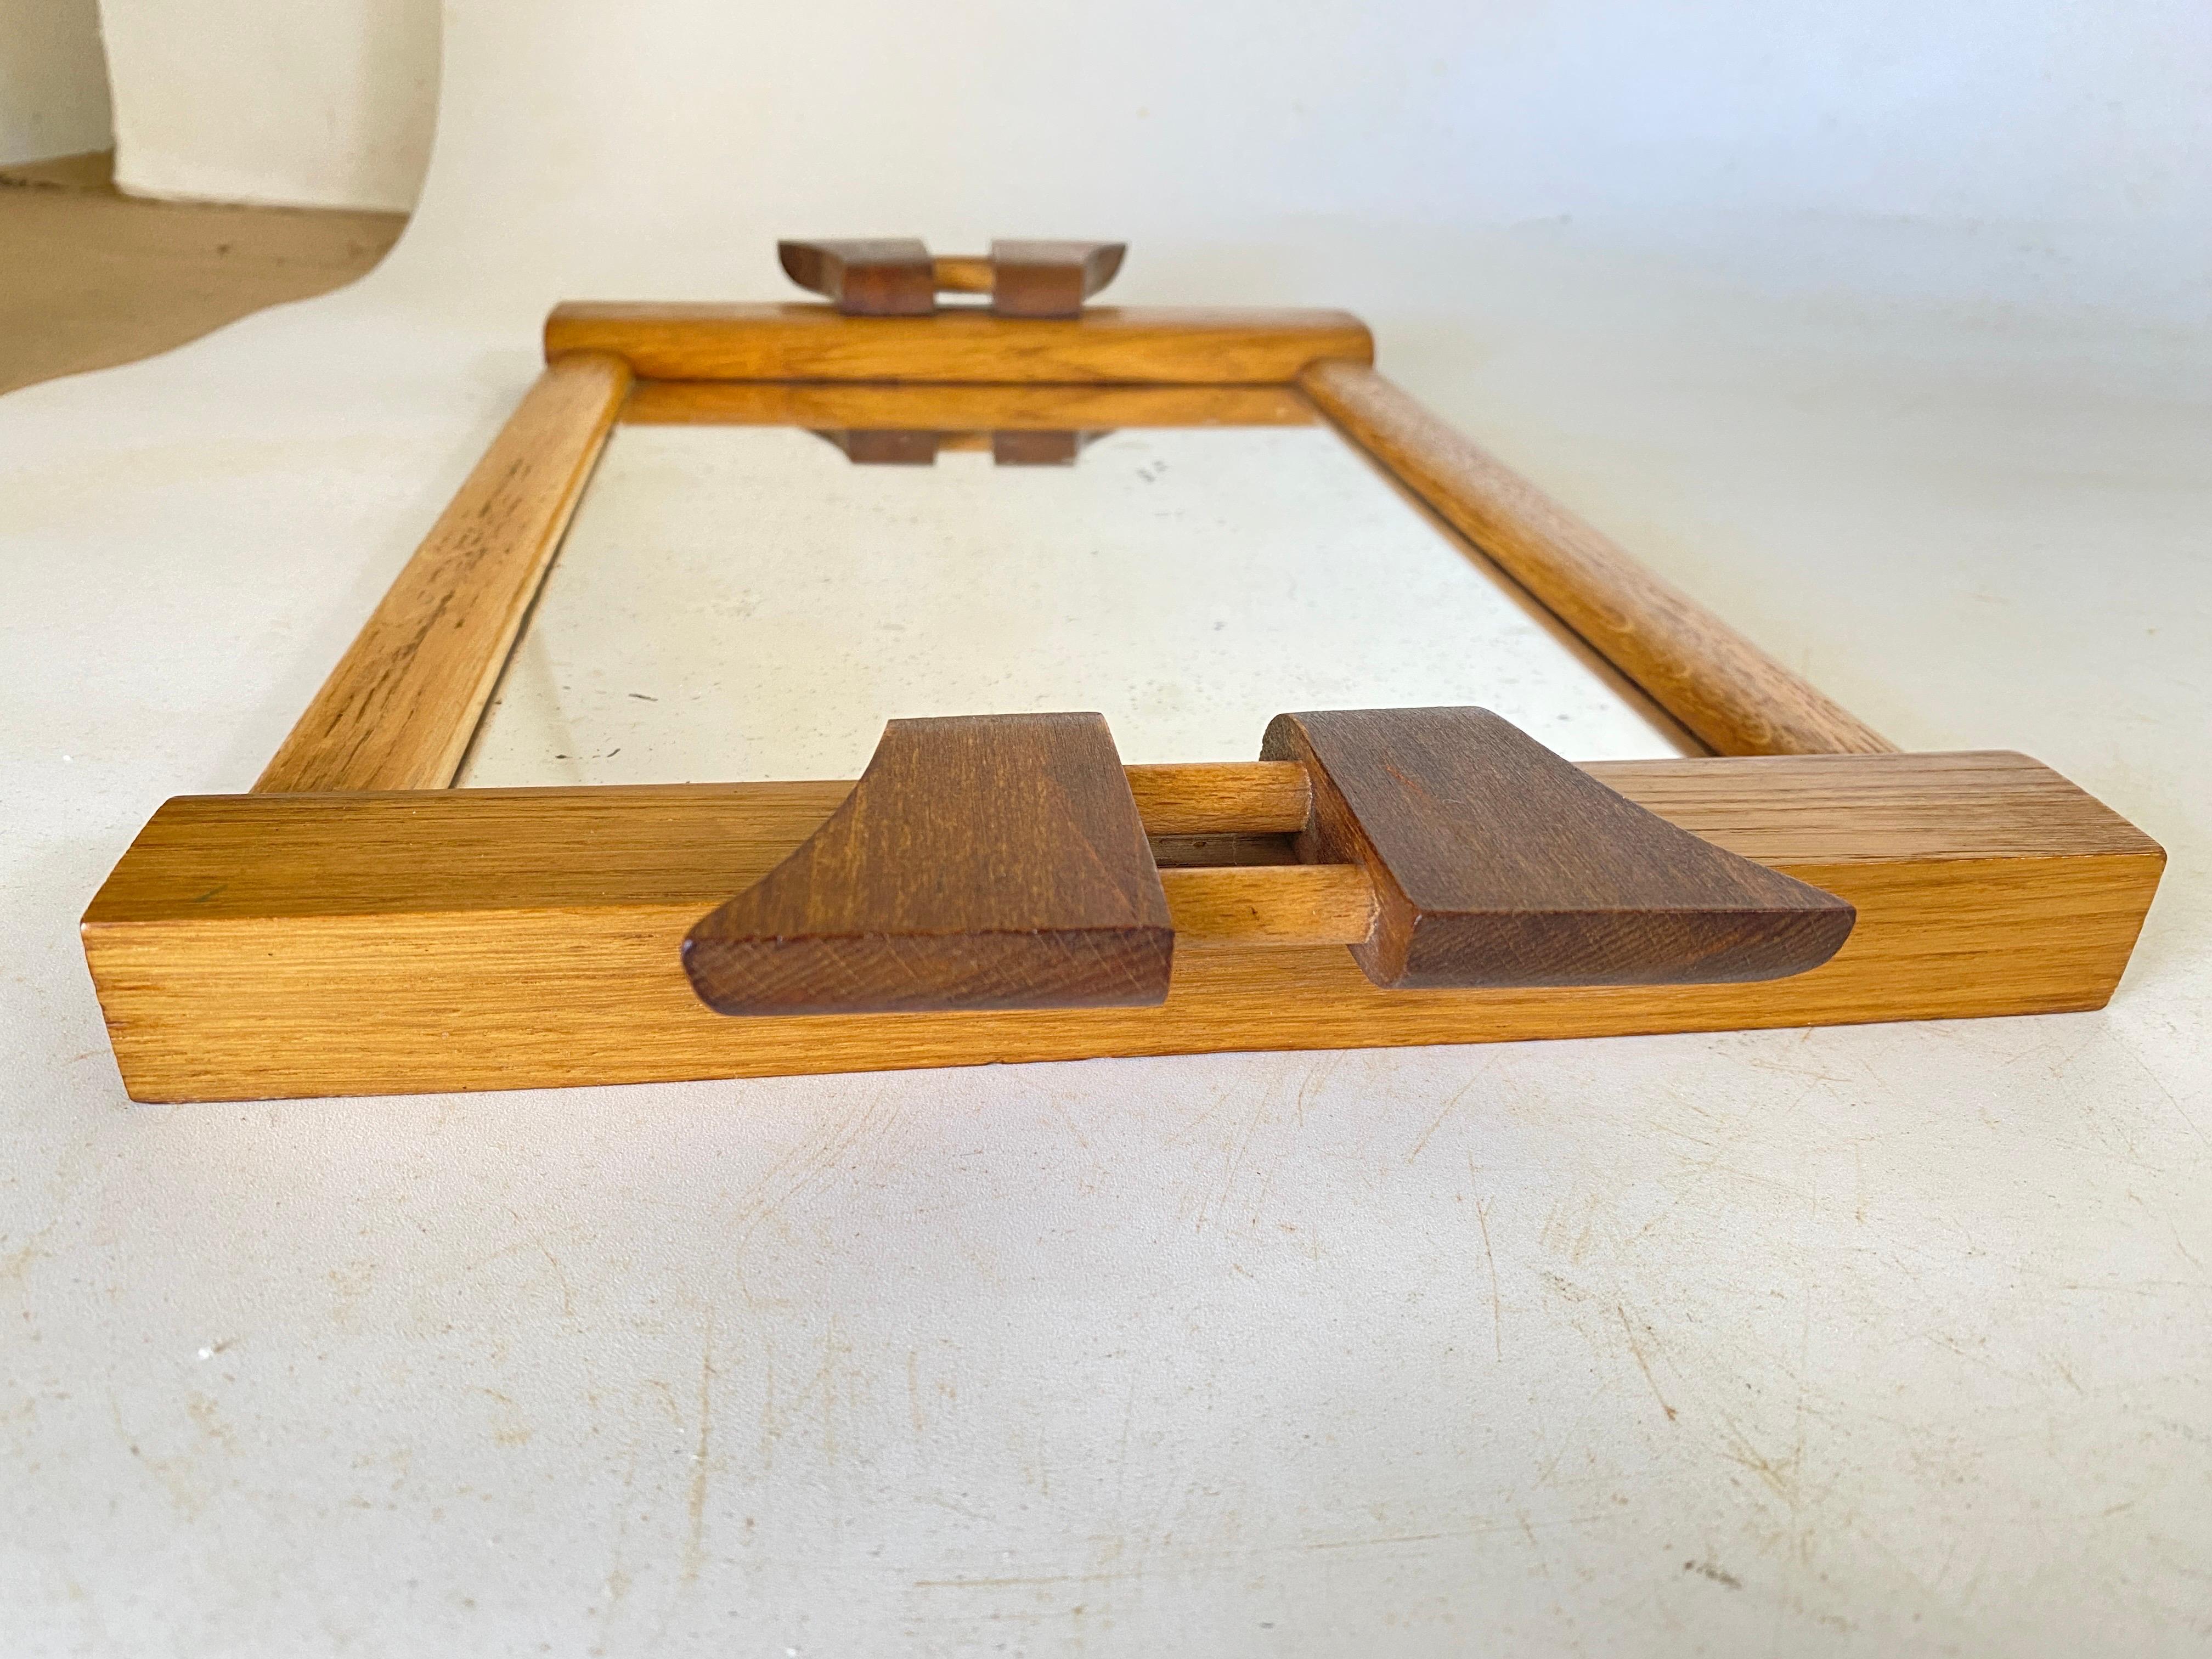 Authentic 1930s Art Deco tray from France. This tray is a medium size for everyday use. The top is in glass. The perimeter is made of wood. The condition is  good vintage, clean and usable.